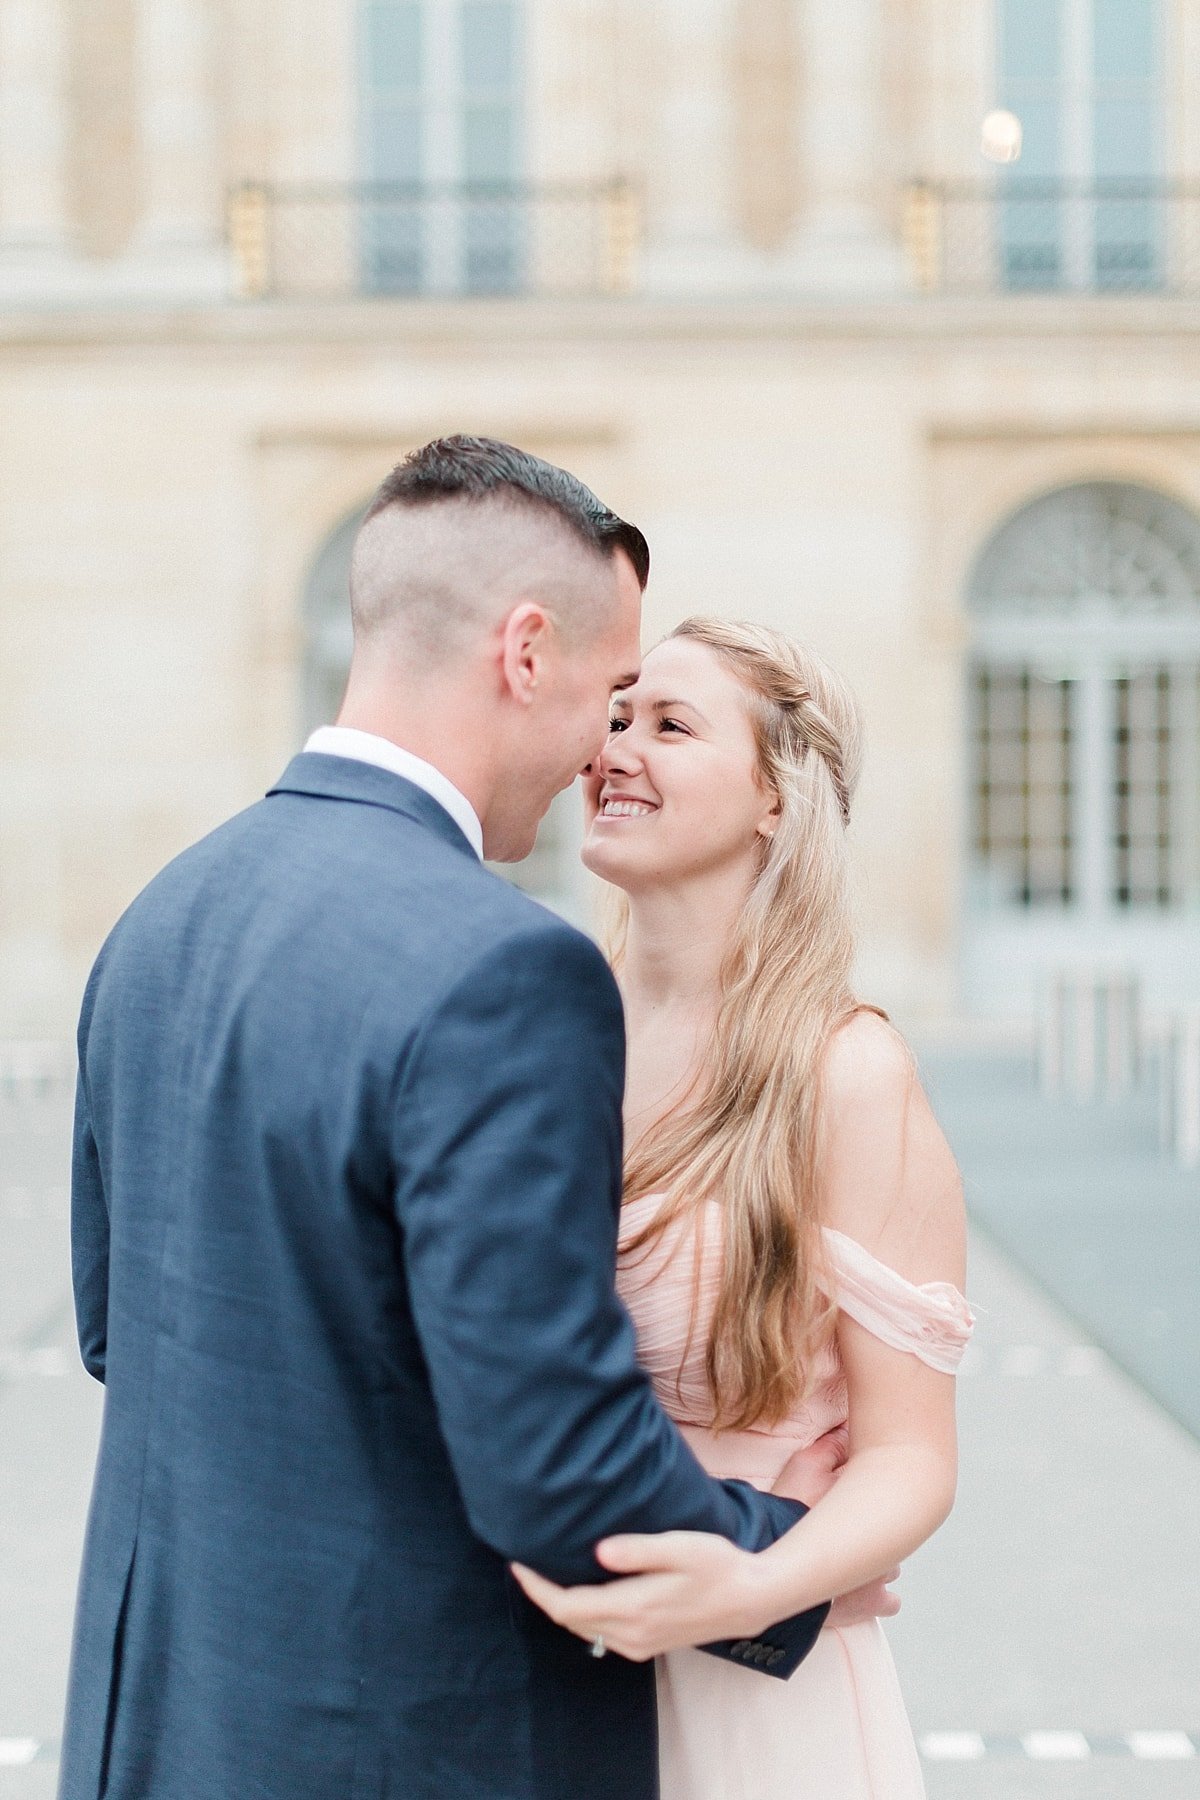 Paris, France anniversary session photographed at Palais Royal by France Destination Wedding Photographer, Alicia Yarrish Photography